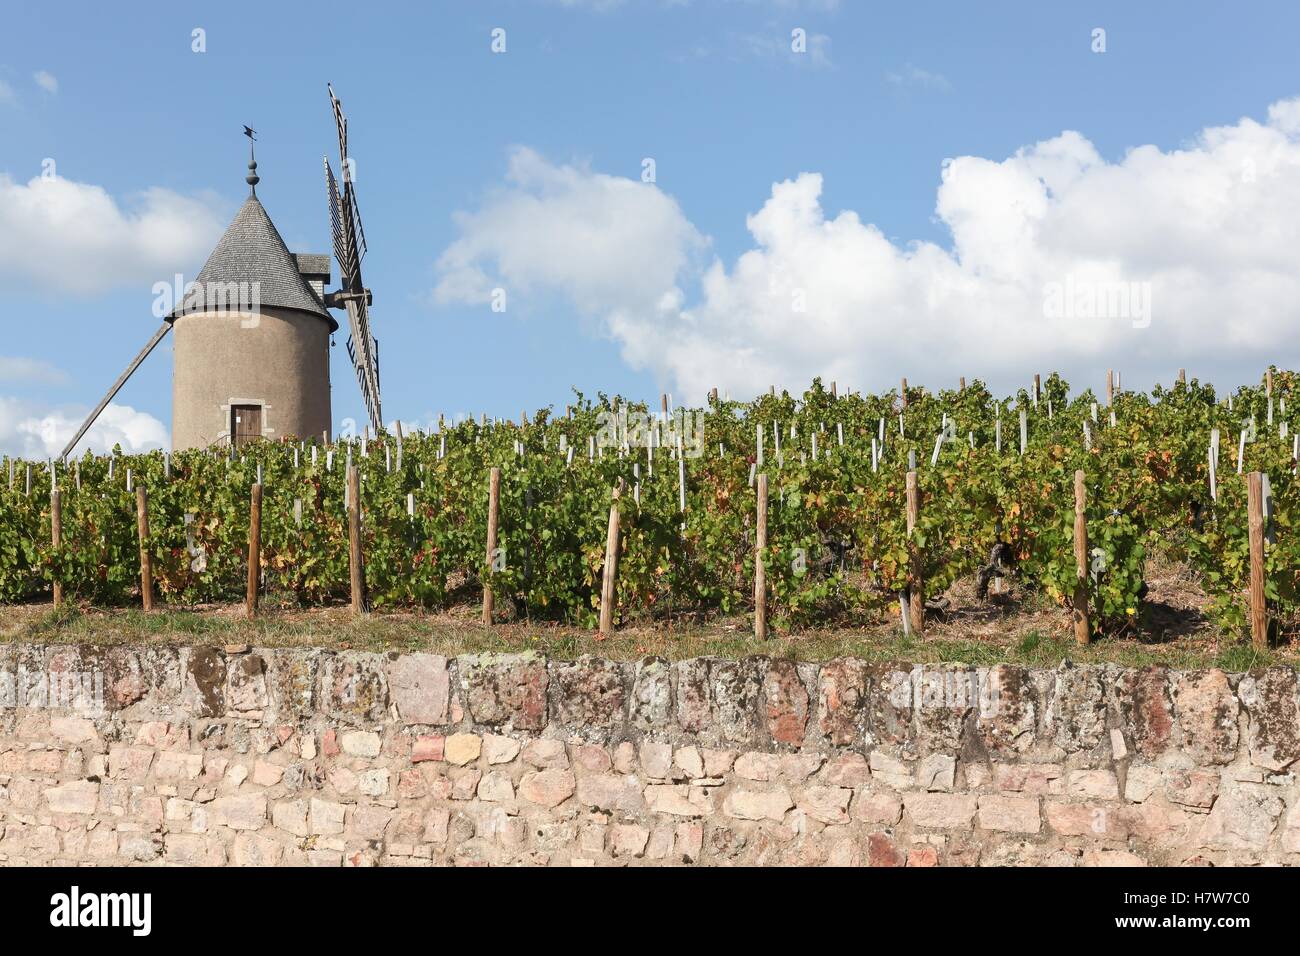 Vineyard with old windmill in Moulin a Vent, Beaujolais. France Stock Photo